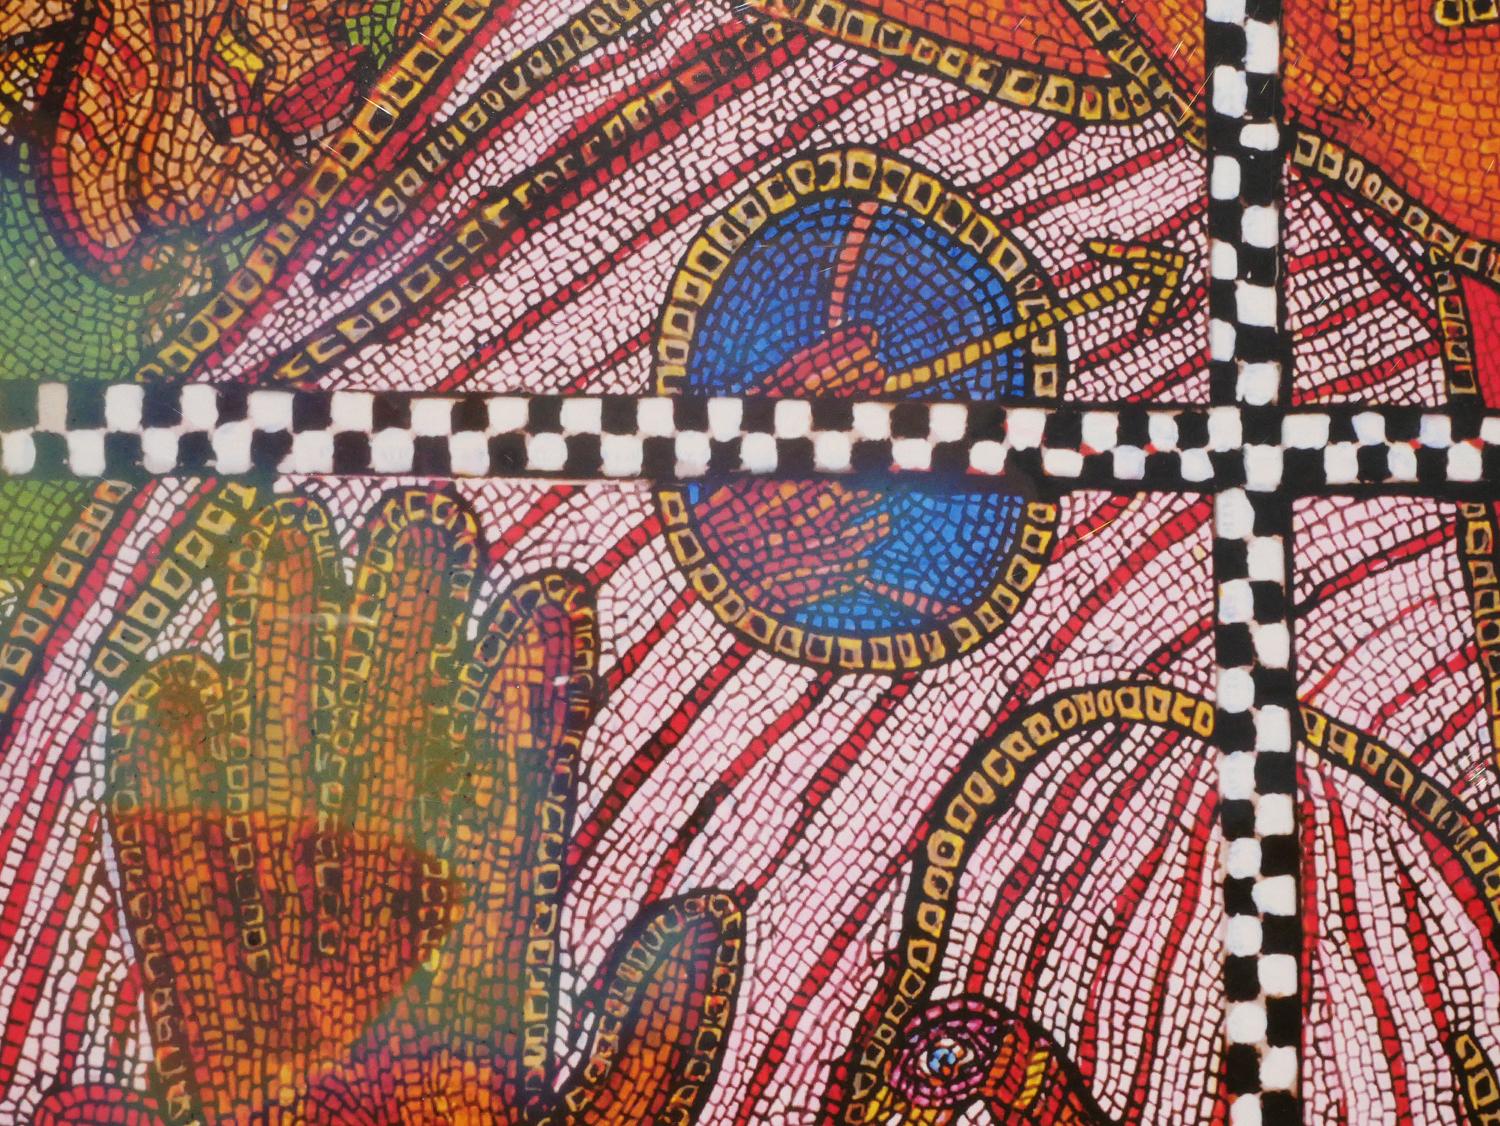 “The Final Compromise” Figurative Mosaic-Style Laser Inkjet Print Ed 1/10 For Sale 6